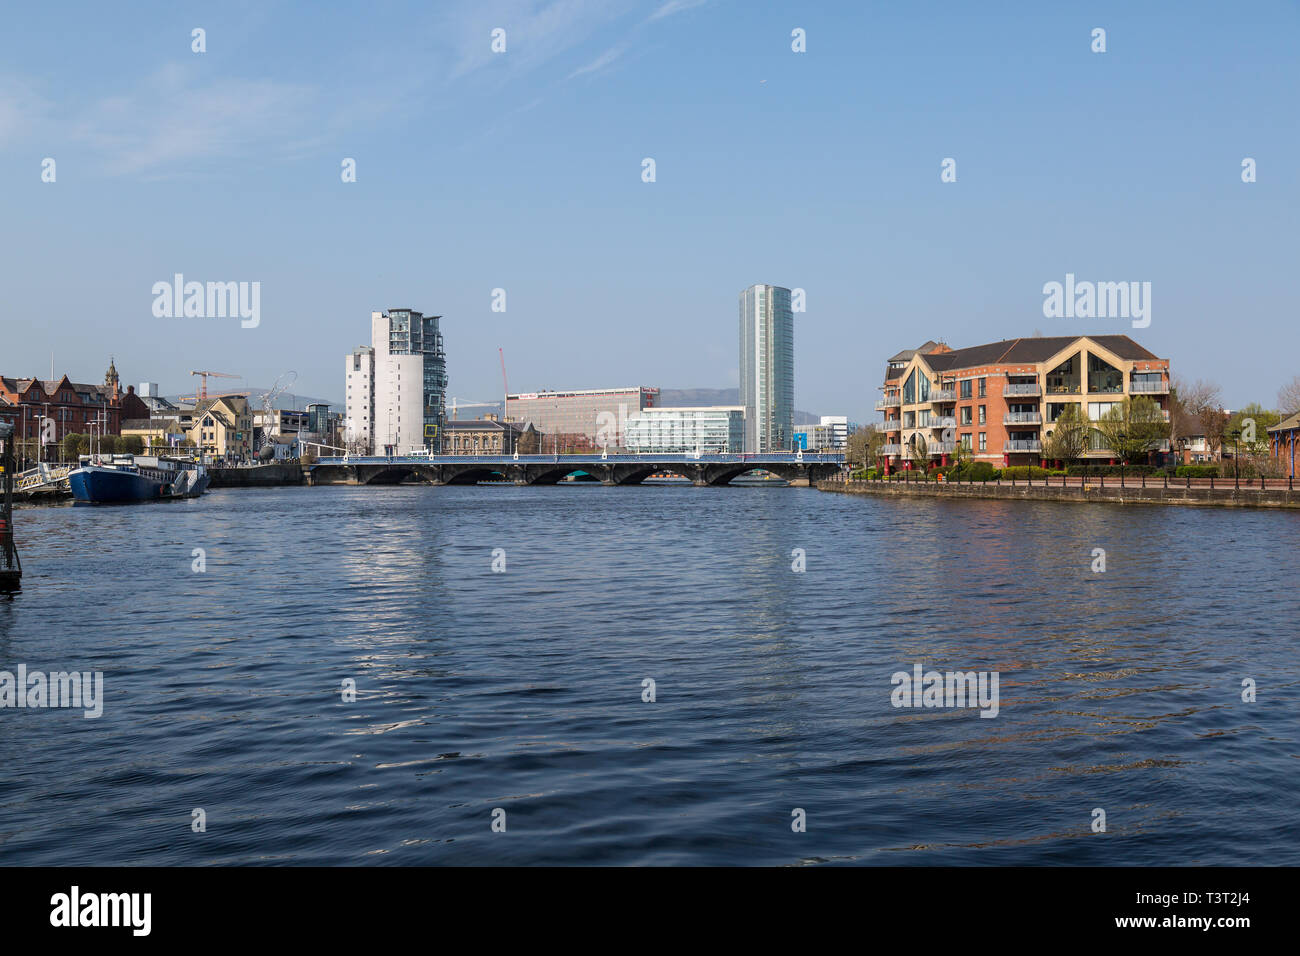 View looking up the River Lagan in Belfast Northern Ireland. Stock Photo